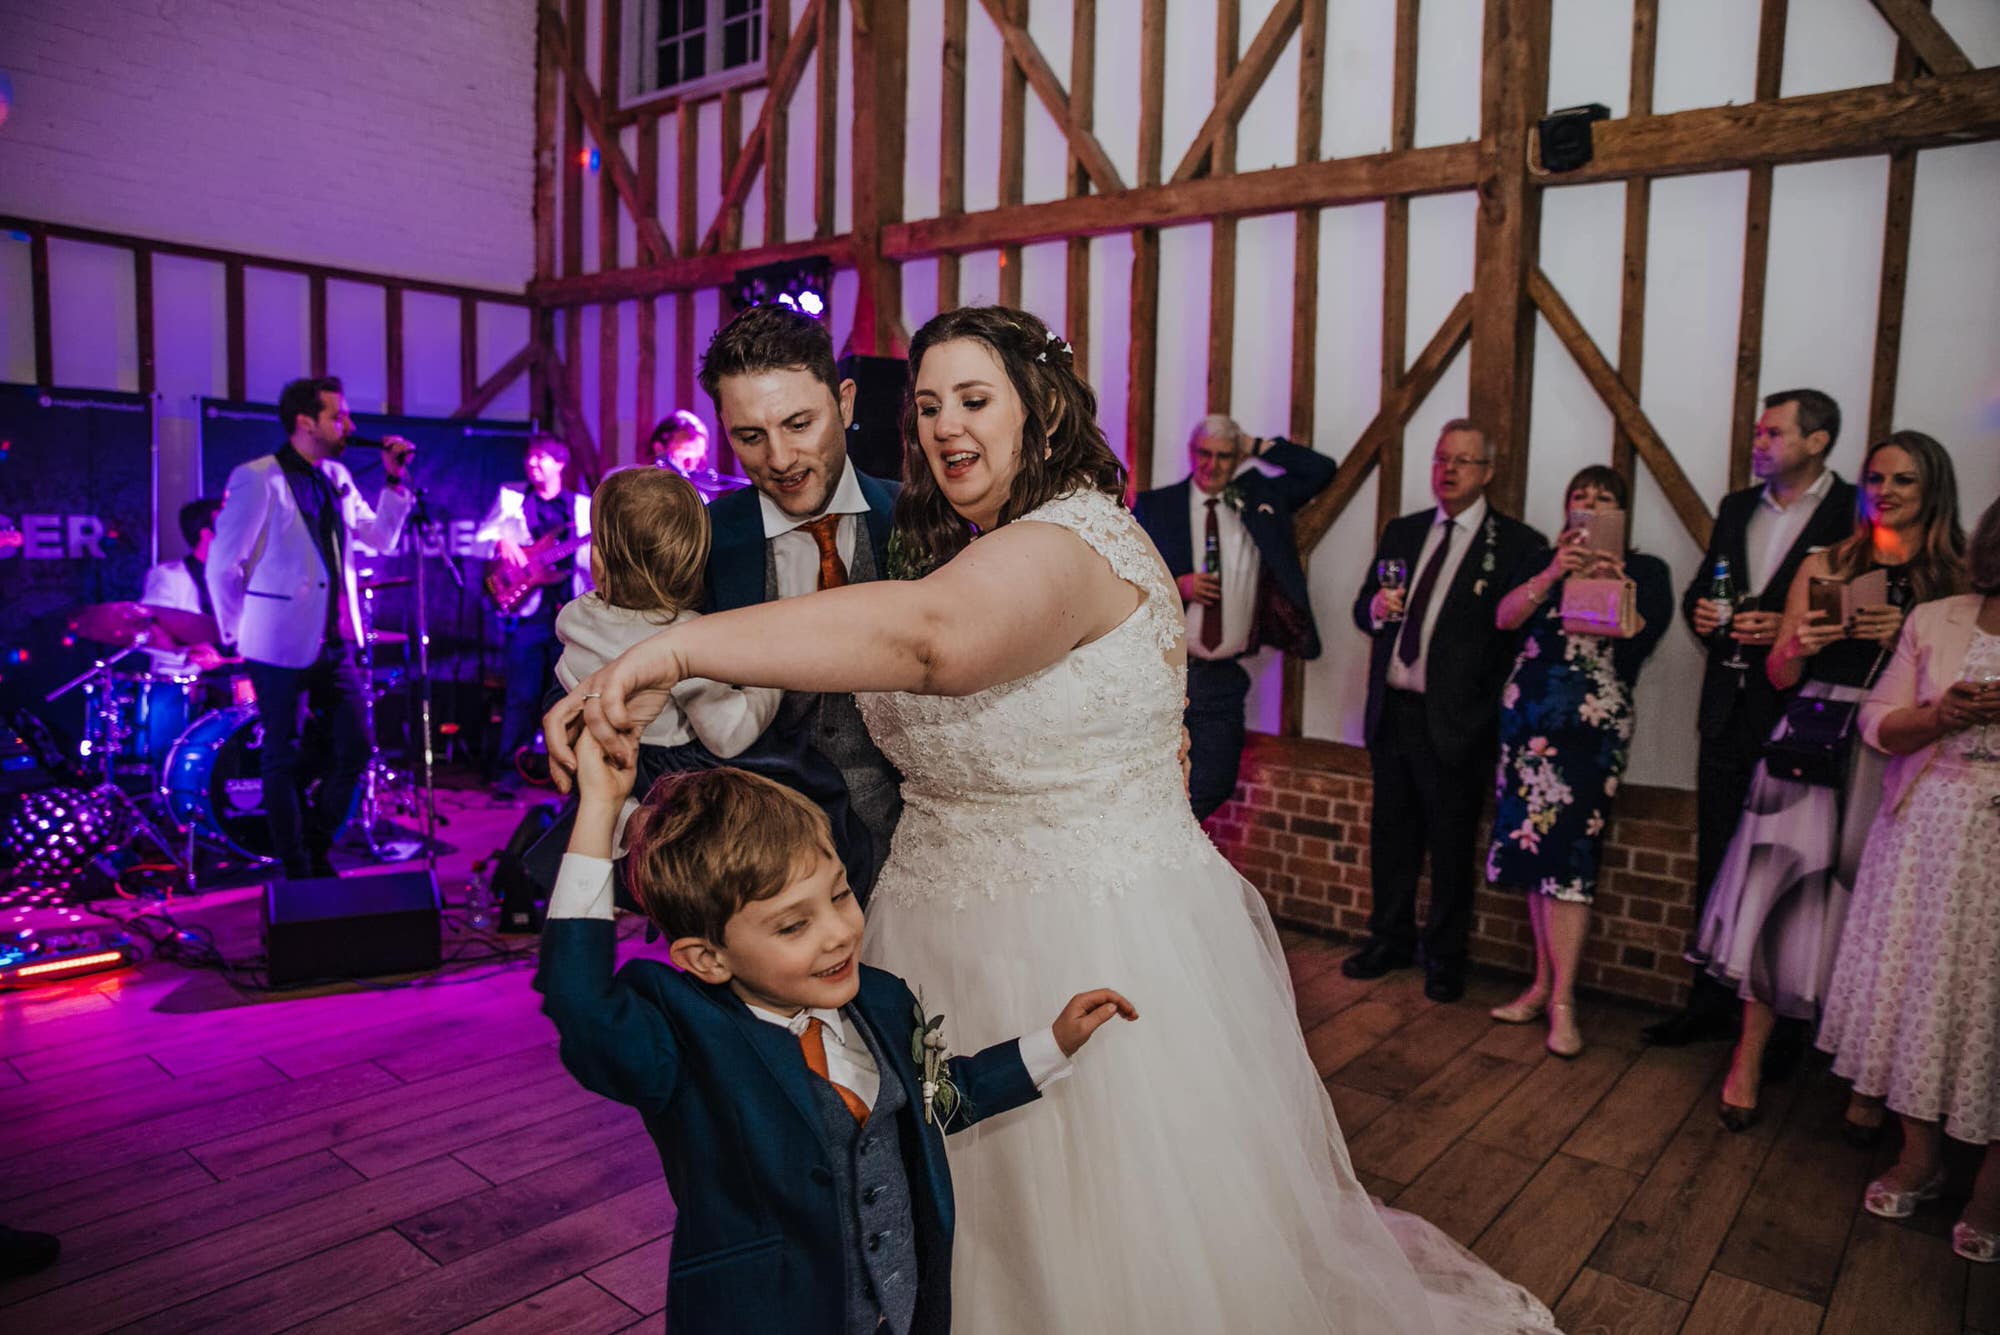 first dance bride and groom at the reception Roshni photography The Milling Barn, Bluntswood Hall, Throcking wedding photographer